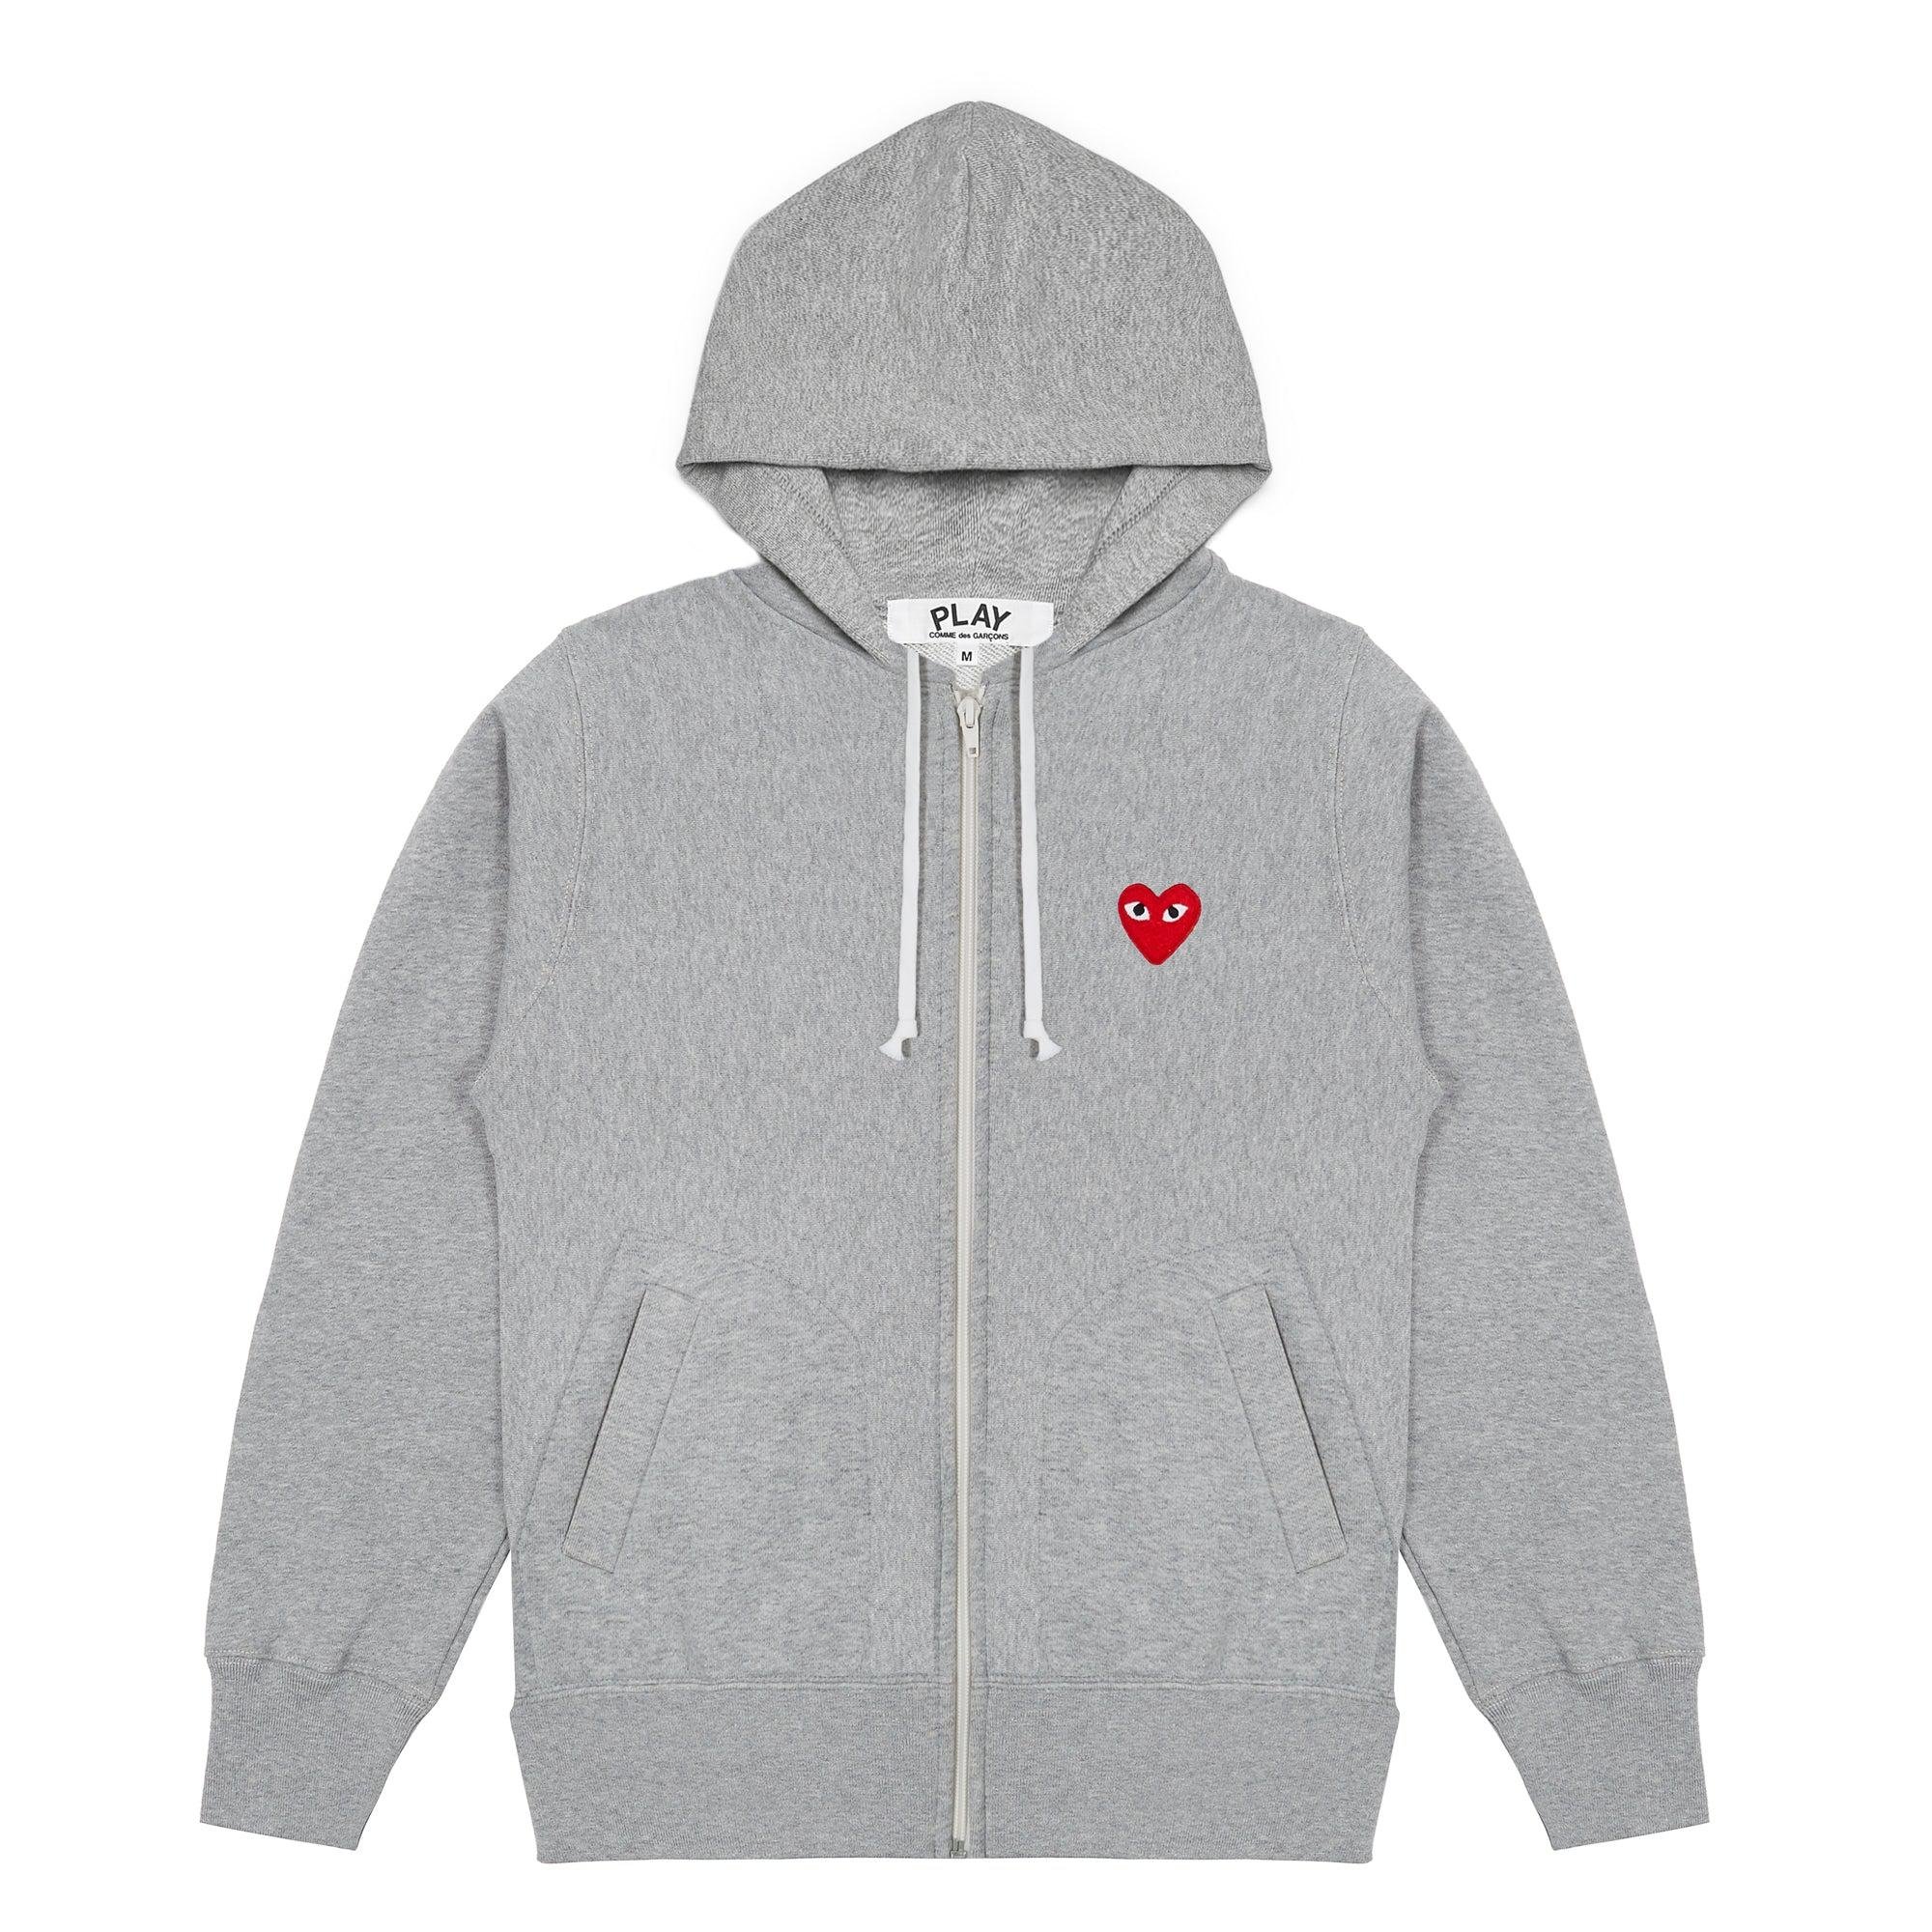 Play Comme des Garçons - Hooded Zip-Up - (Grey) by COMME DES GARCONS